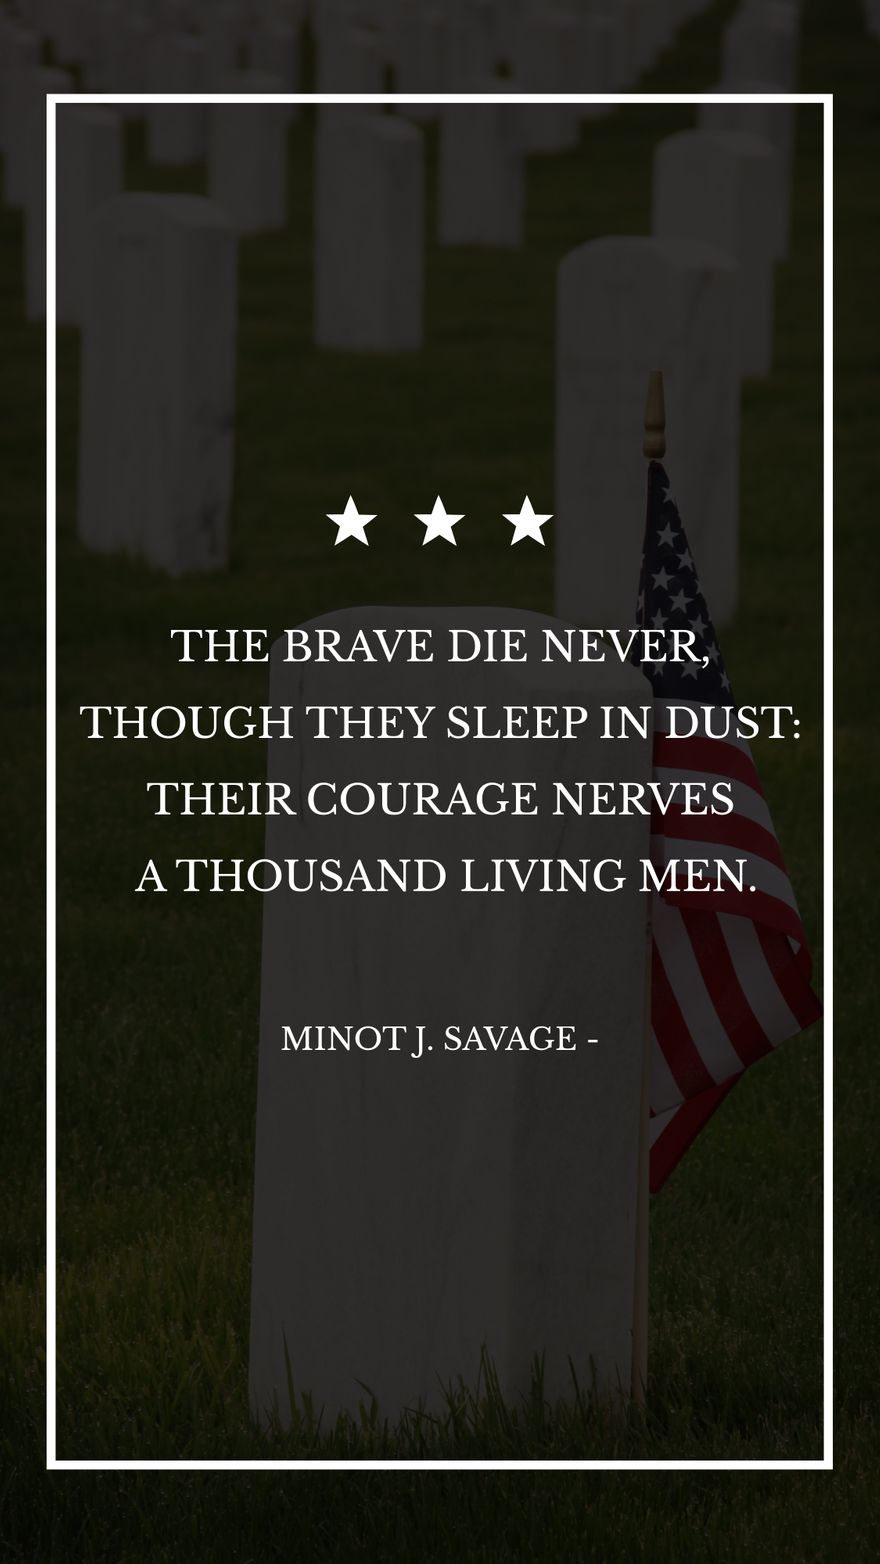 Free Minot J. Savage - The brave die never, though they sleep in dust: Their courage nerves a thousand living men.